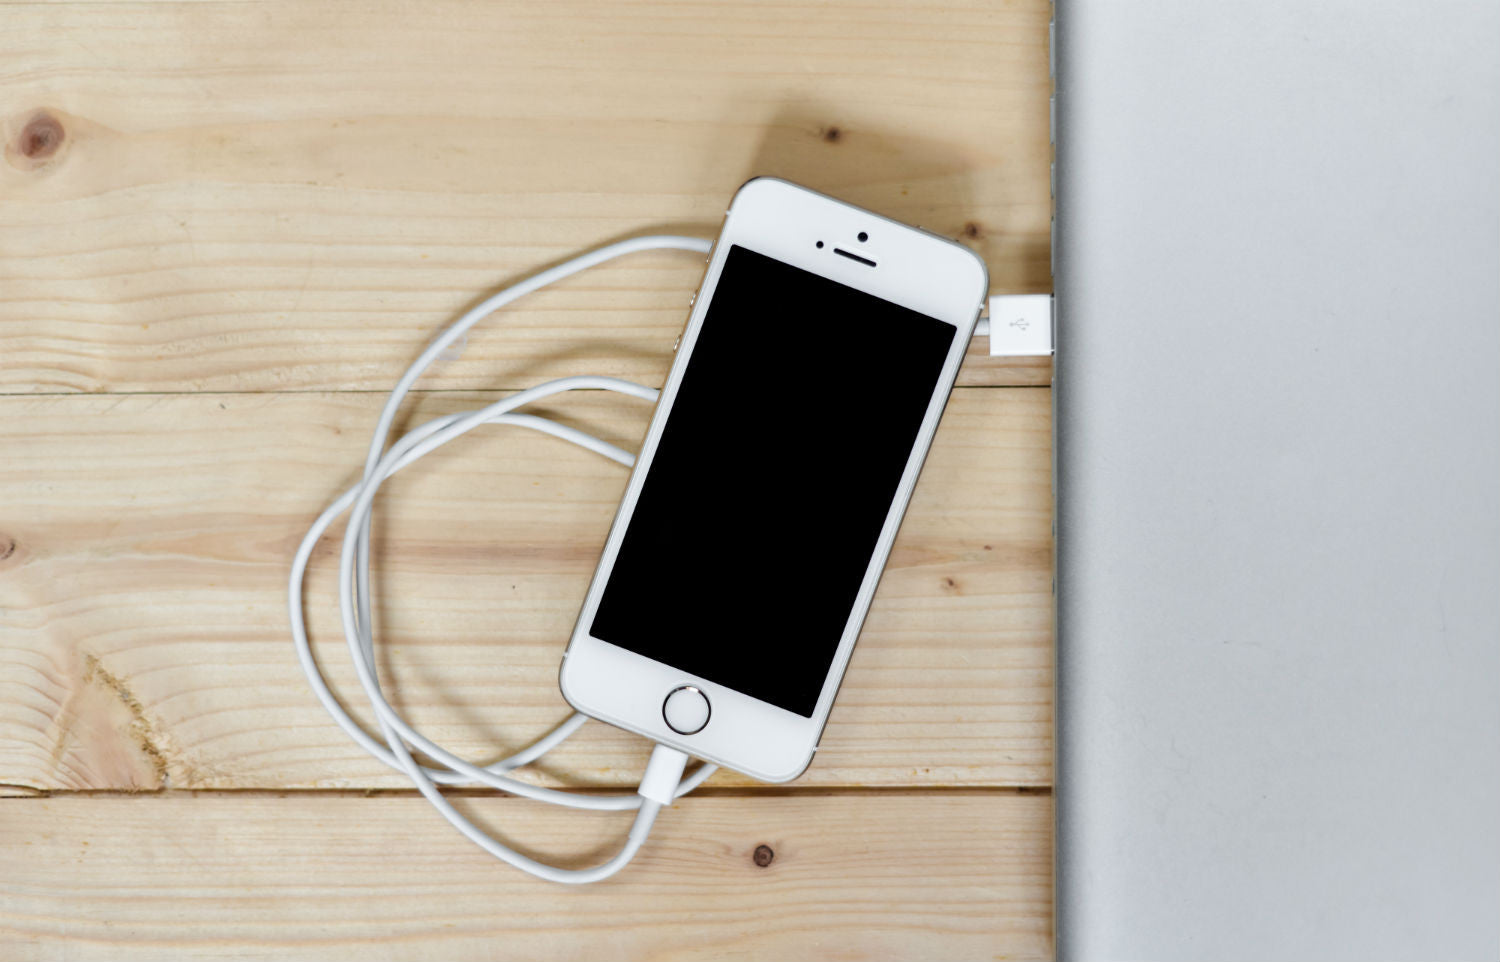 Are Apple About to Ditch Their Lightning Charging Port?